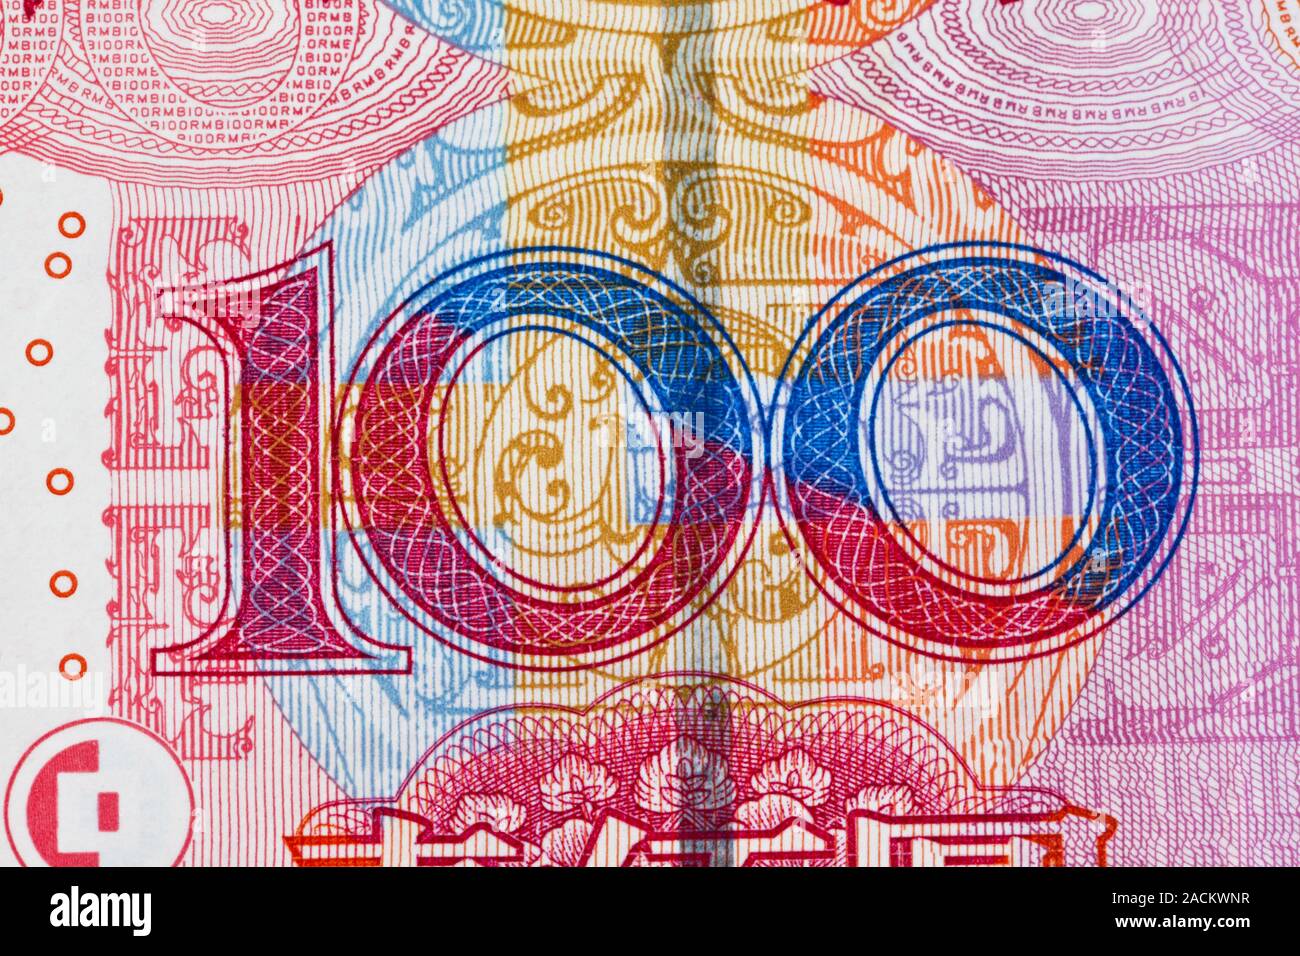 China money yuan. Chinese currency Stock Photo